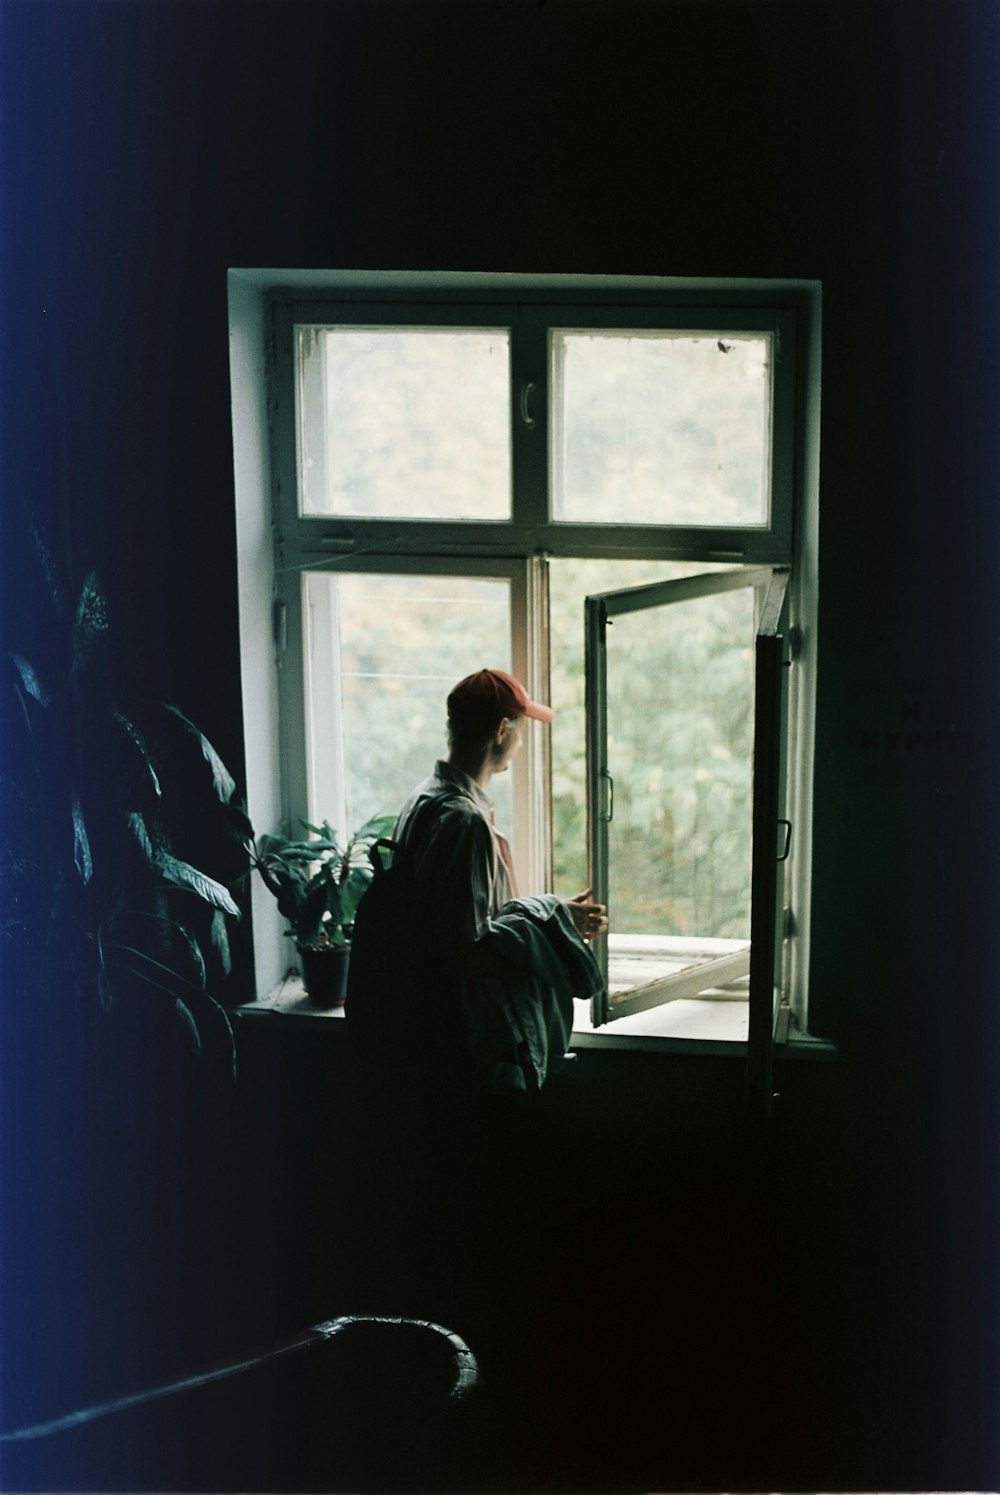 a person sitting on a window sill looking out the window